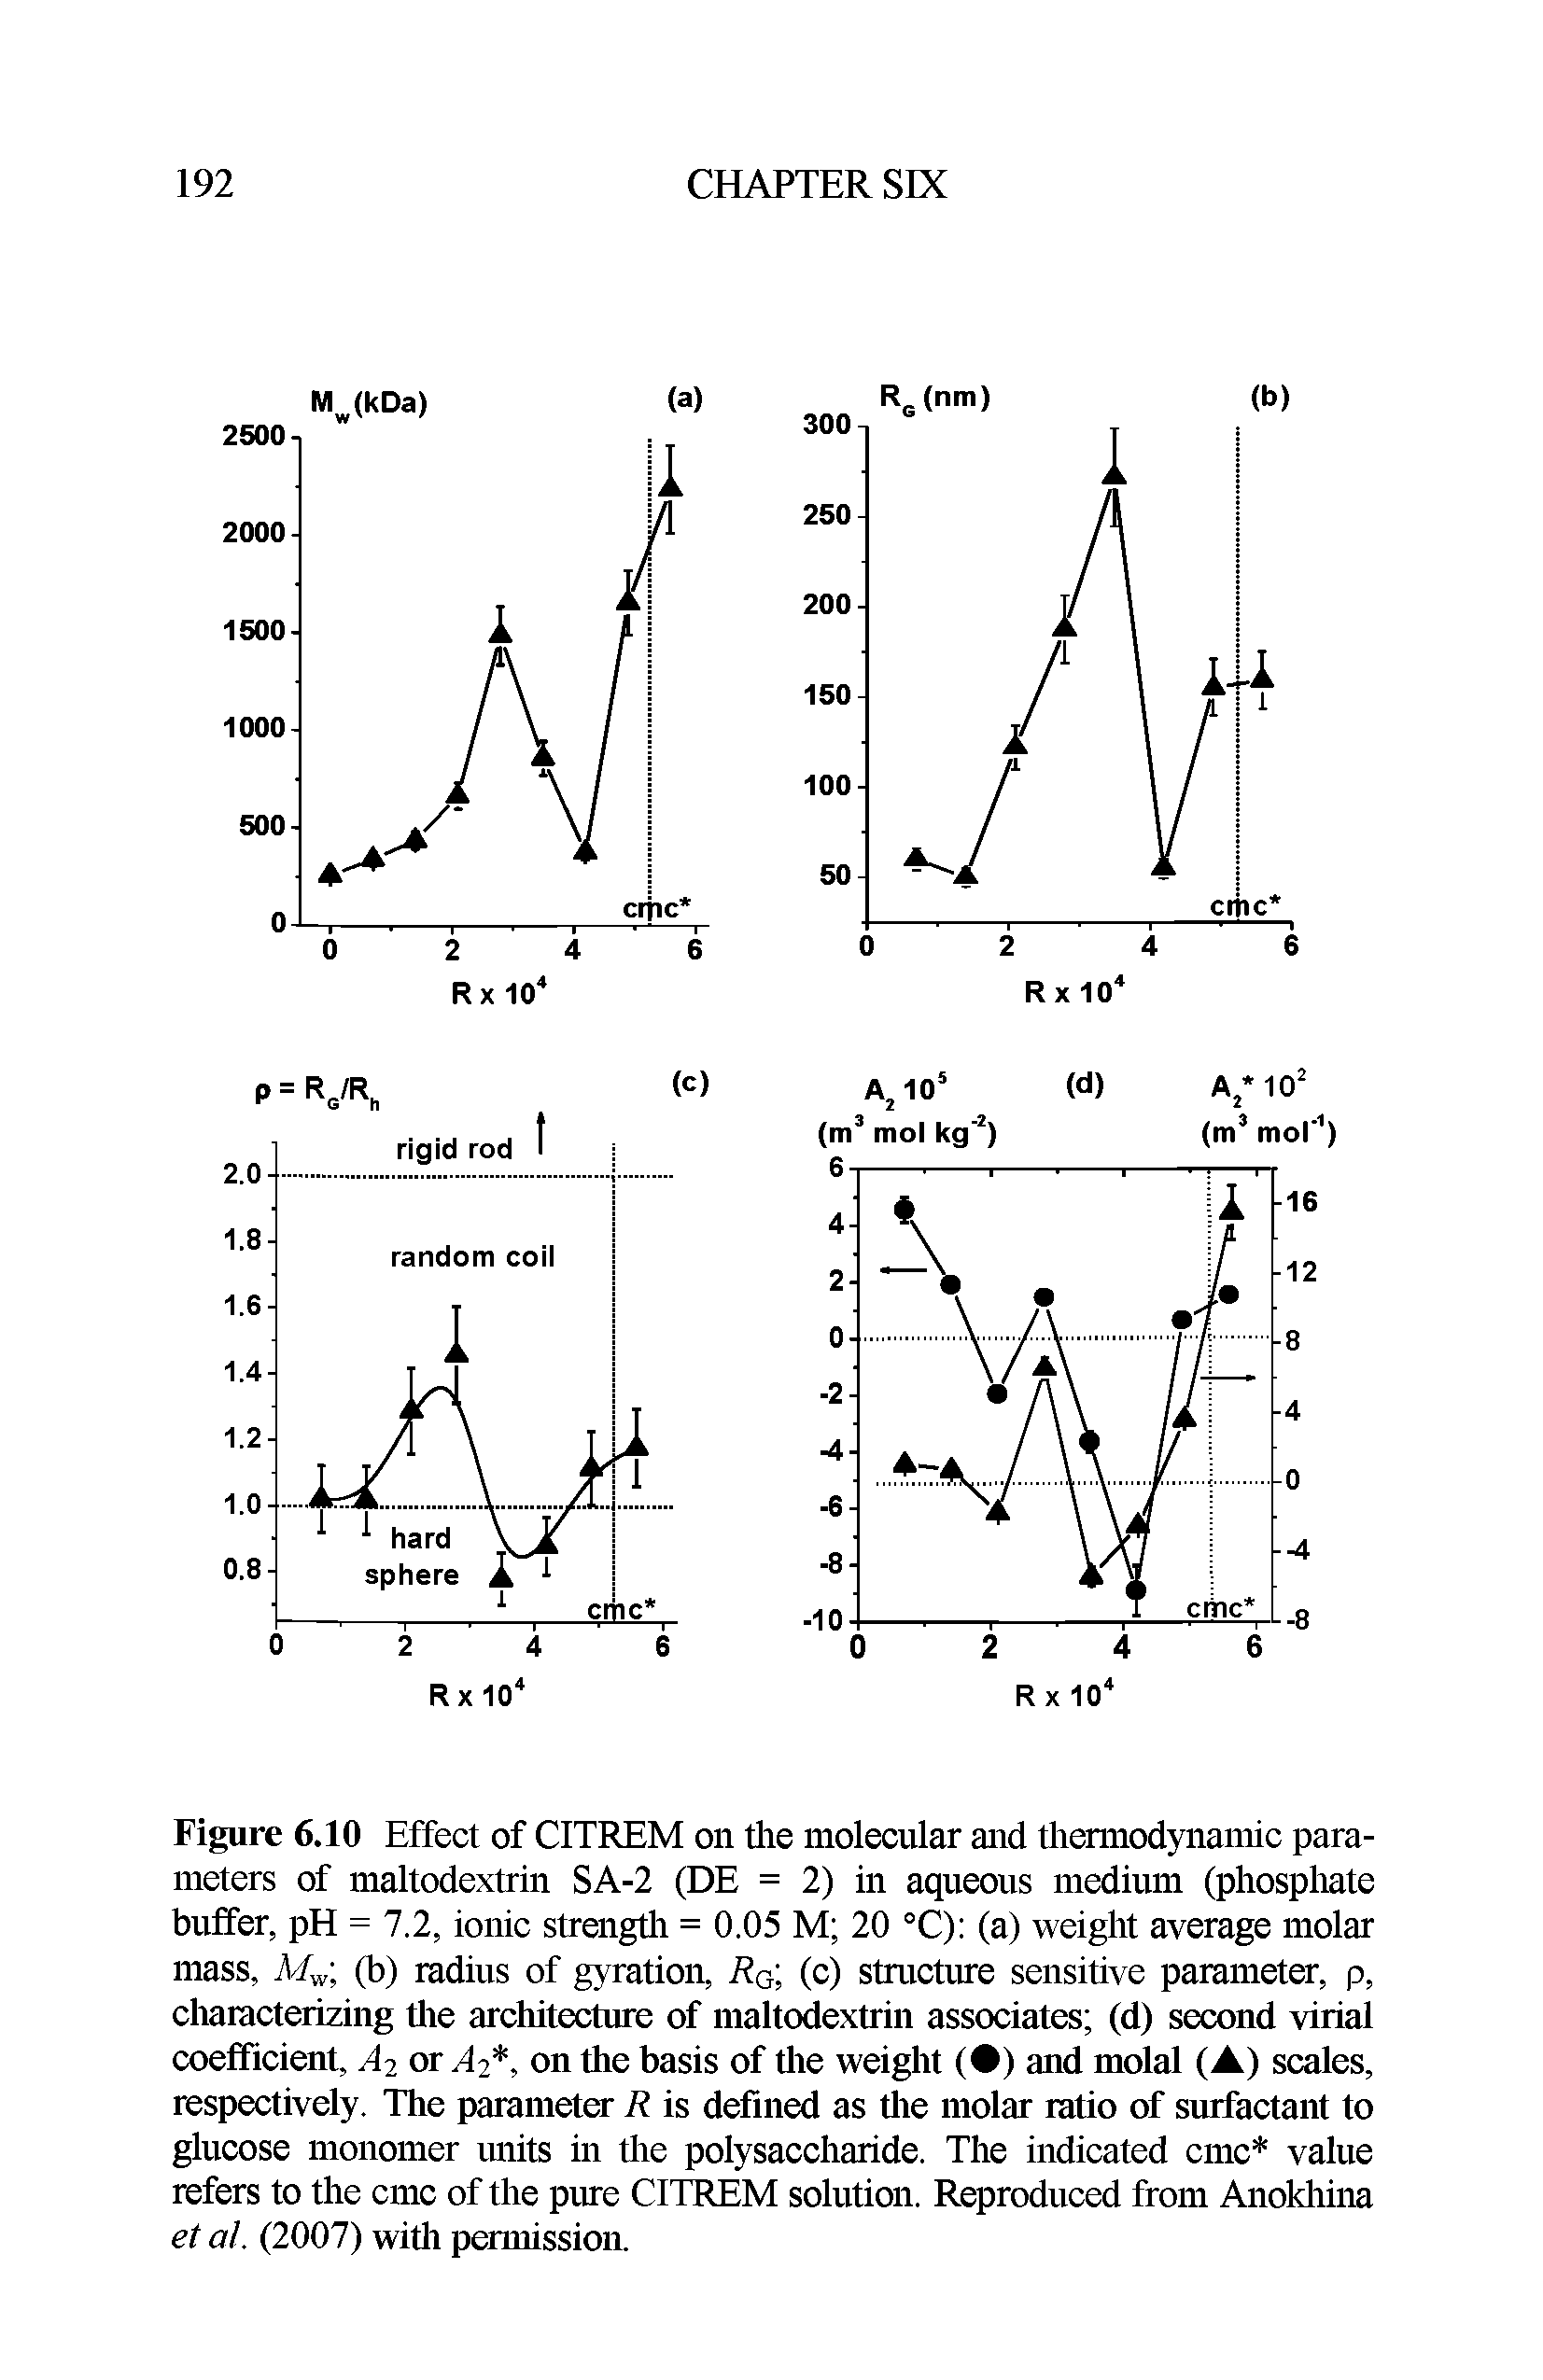 Figure 6.10 Effect of CITREM on the molecular and thermodynamic parameters of maltodextrin SA-2 (DE = 2) in aqueous medium (phosphate buffer, pH = 7.2, ionic strength = 0.05 M 20 °C) (a) weight average molar mass, Mw (b) radius of gyration, Ra (c) structure sensitive parameter, p, characterizing die architecture of maltodextrin associates (d) second virial coefficient, A2 or A2, on the basis of the weight ( ) and molal (A) scales, respectively. The parameter R is defined as the molar ratio of surfactant to glucose monomer units in the polysaccharide. The indicated cmc value refers to the cmc of the pure CITREM solution. Reproduced from Anokhina et al. (2007) with permission.